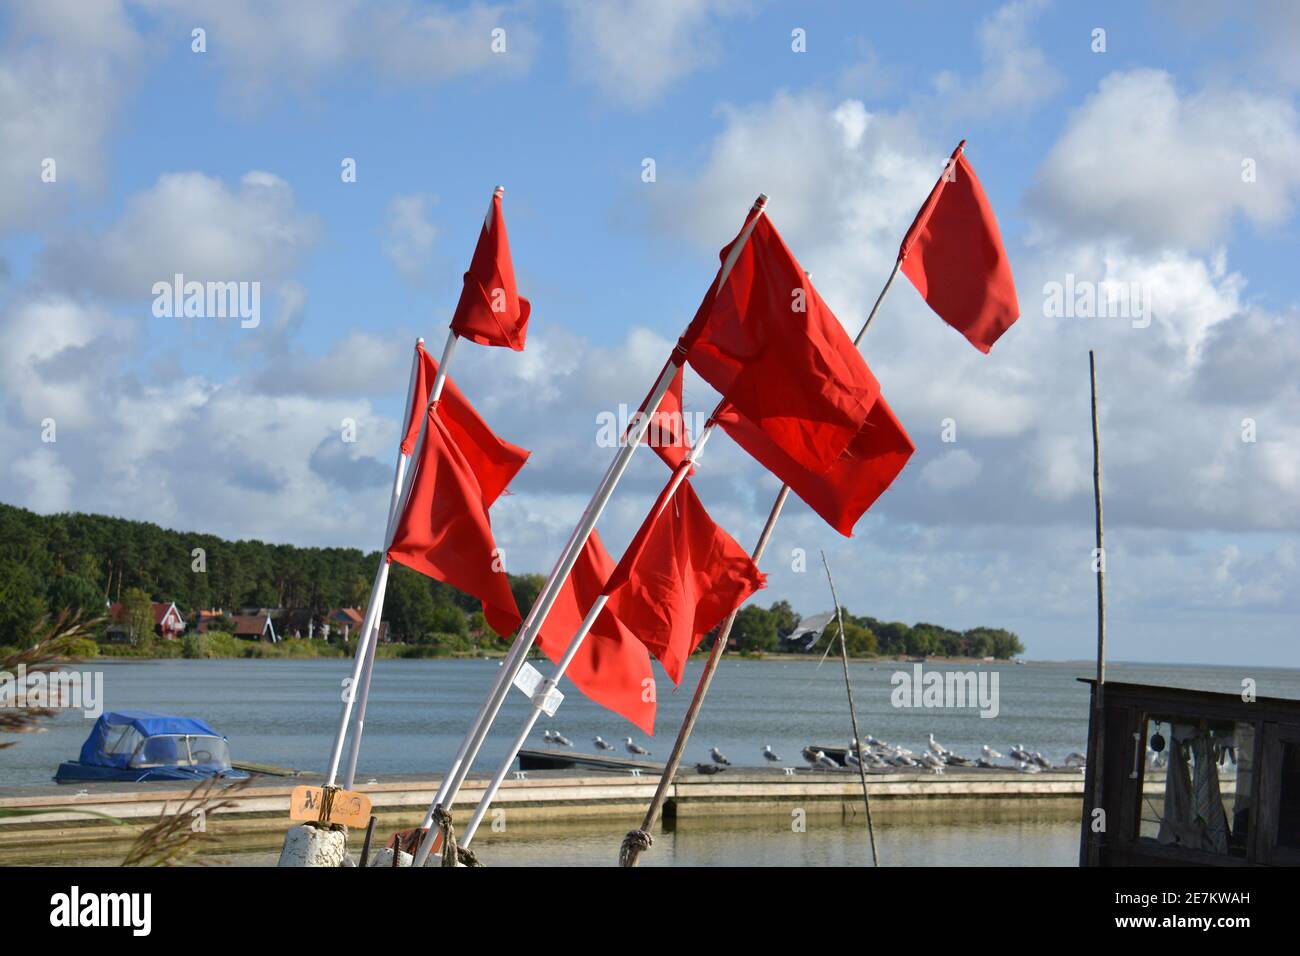 Red fishing flags group near sea Stock Photo